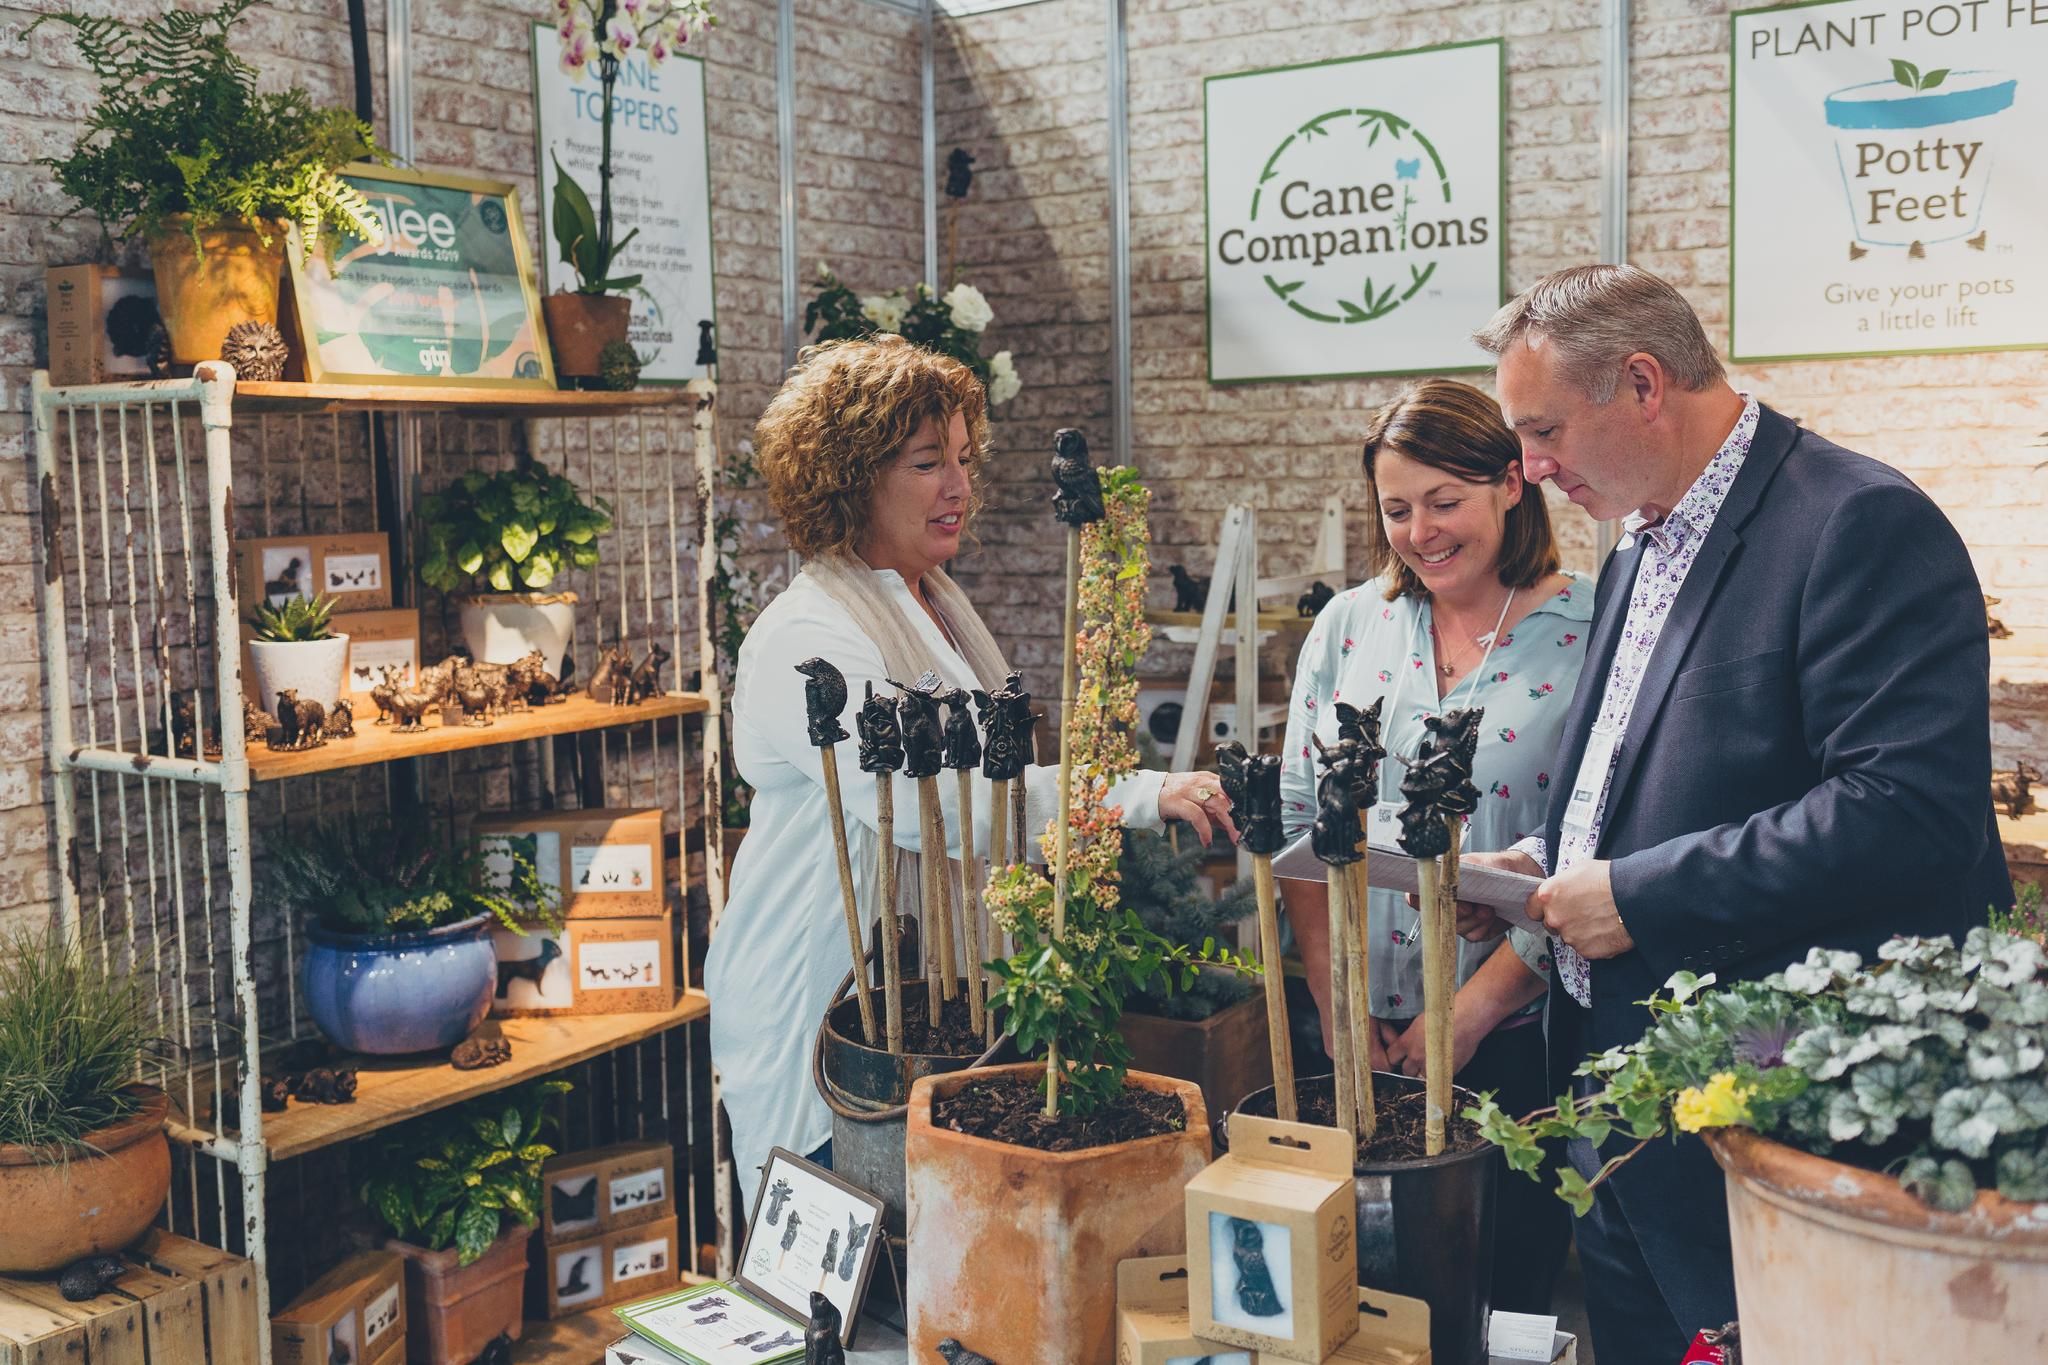 A look to Glee 2020: where the garden retail sector thrives